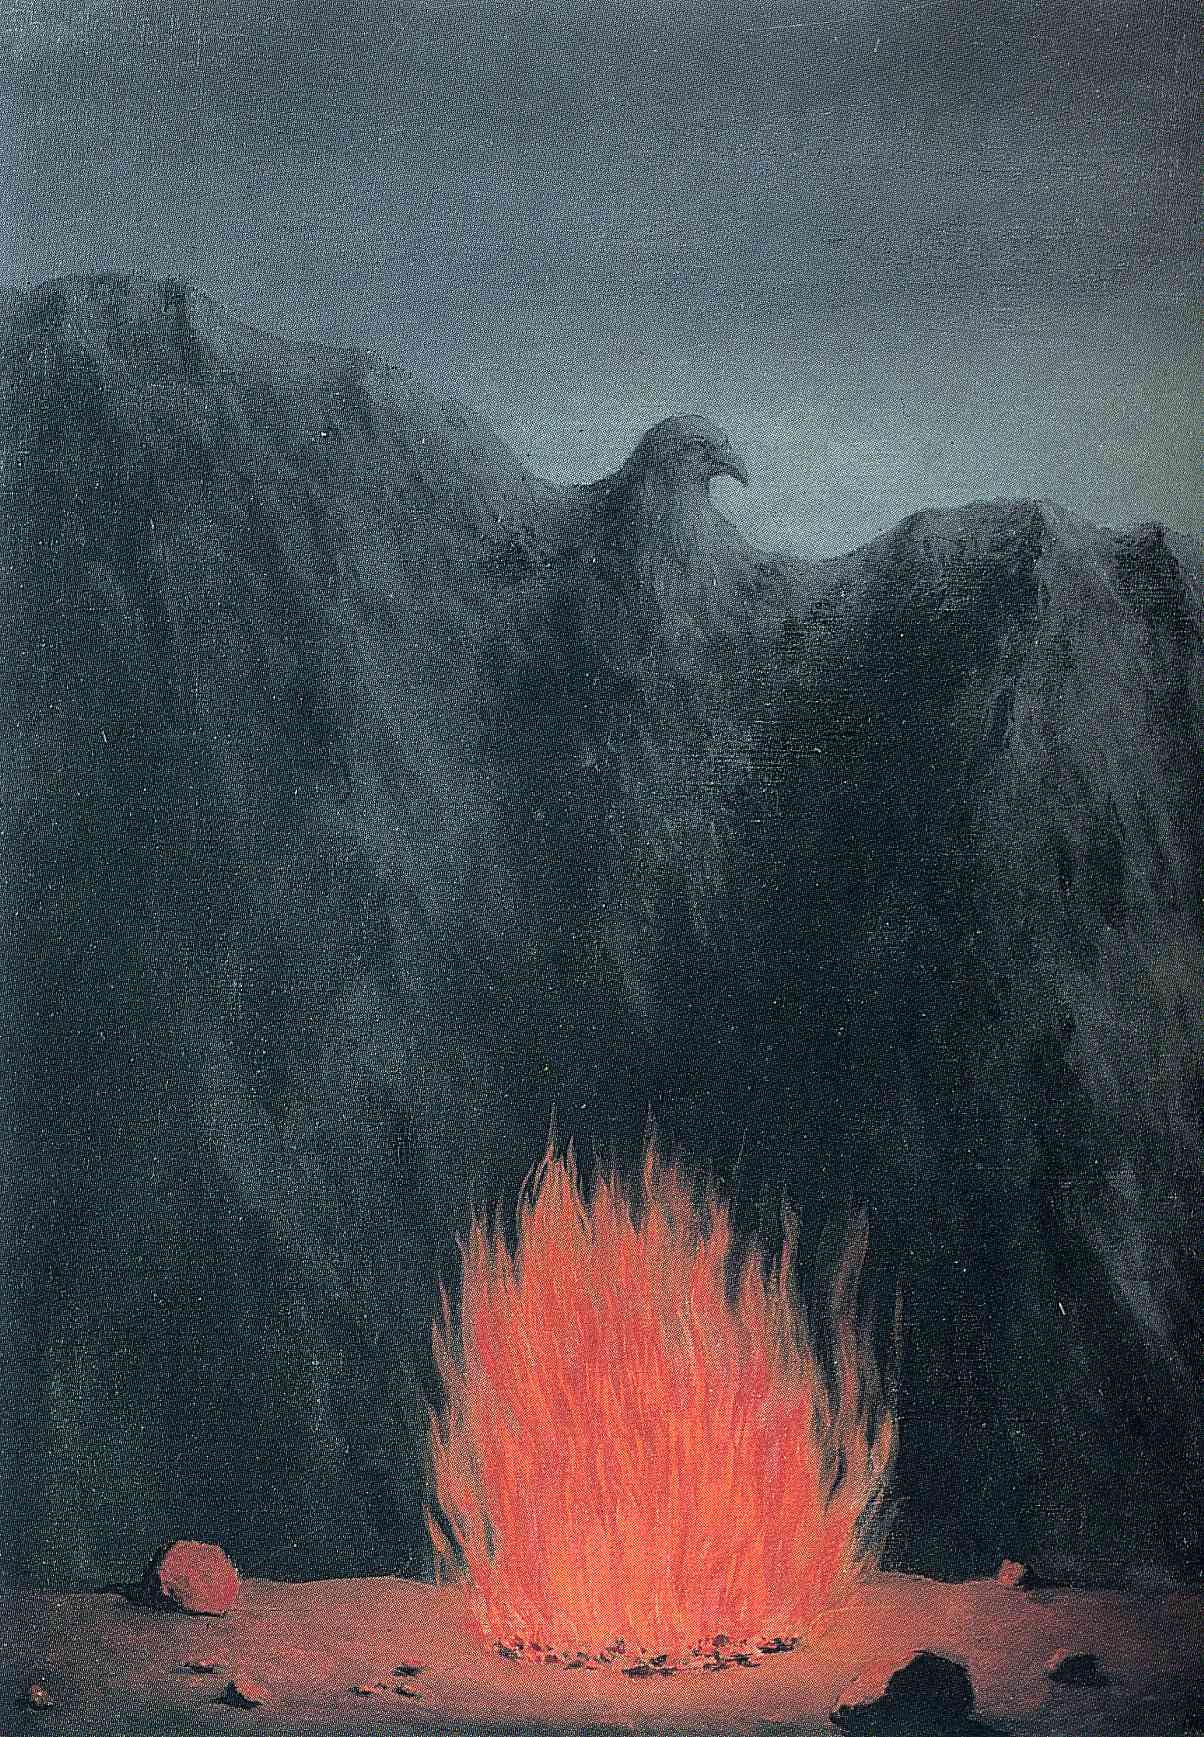 A dark and rocky landscape at night; a fire; an eagle sculpture.